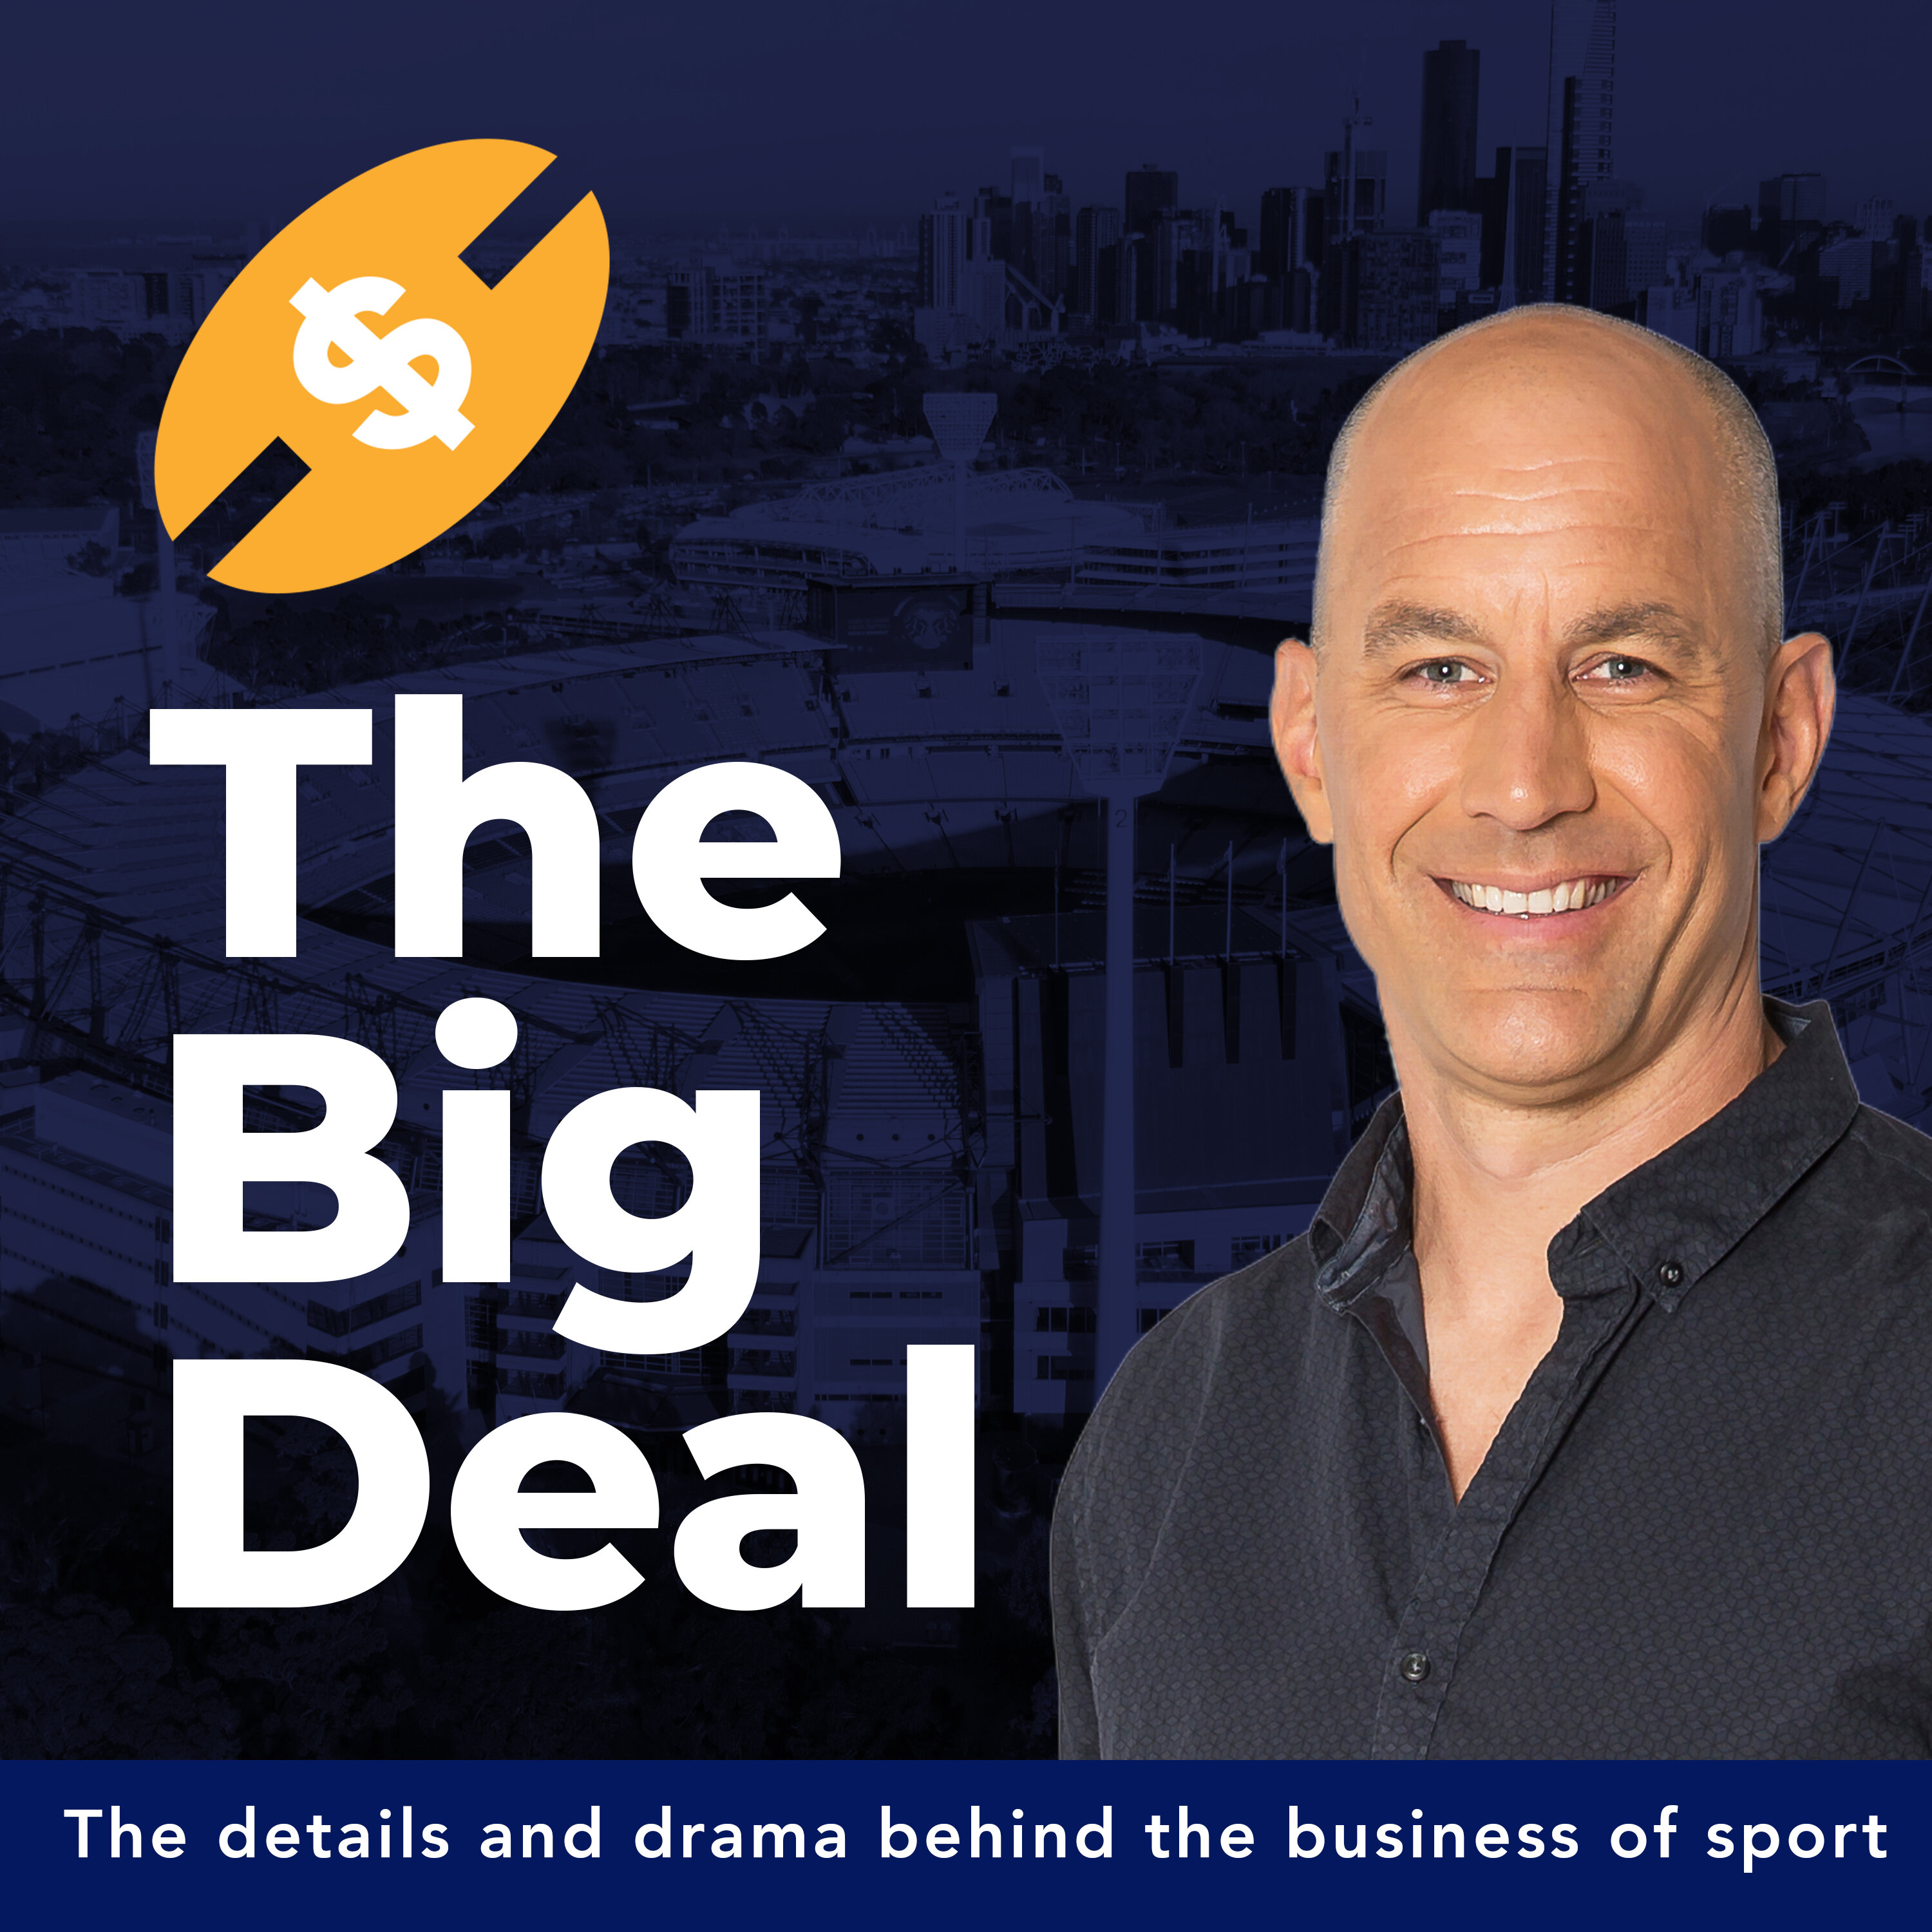 Sports Biz Wrap: Did Opening Round work? NRL's US ratings revealed, Brayshaw's payout, Aussie interest in The Hundred, Kestelman sells United share, Caitlin Clark breaks 25-year record & more